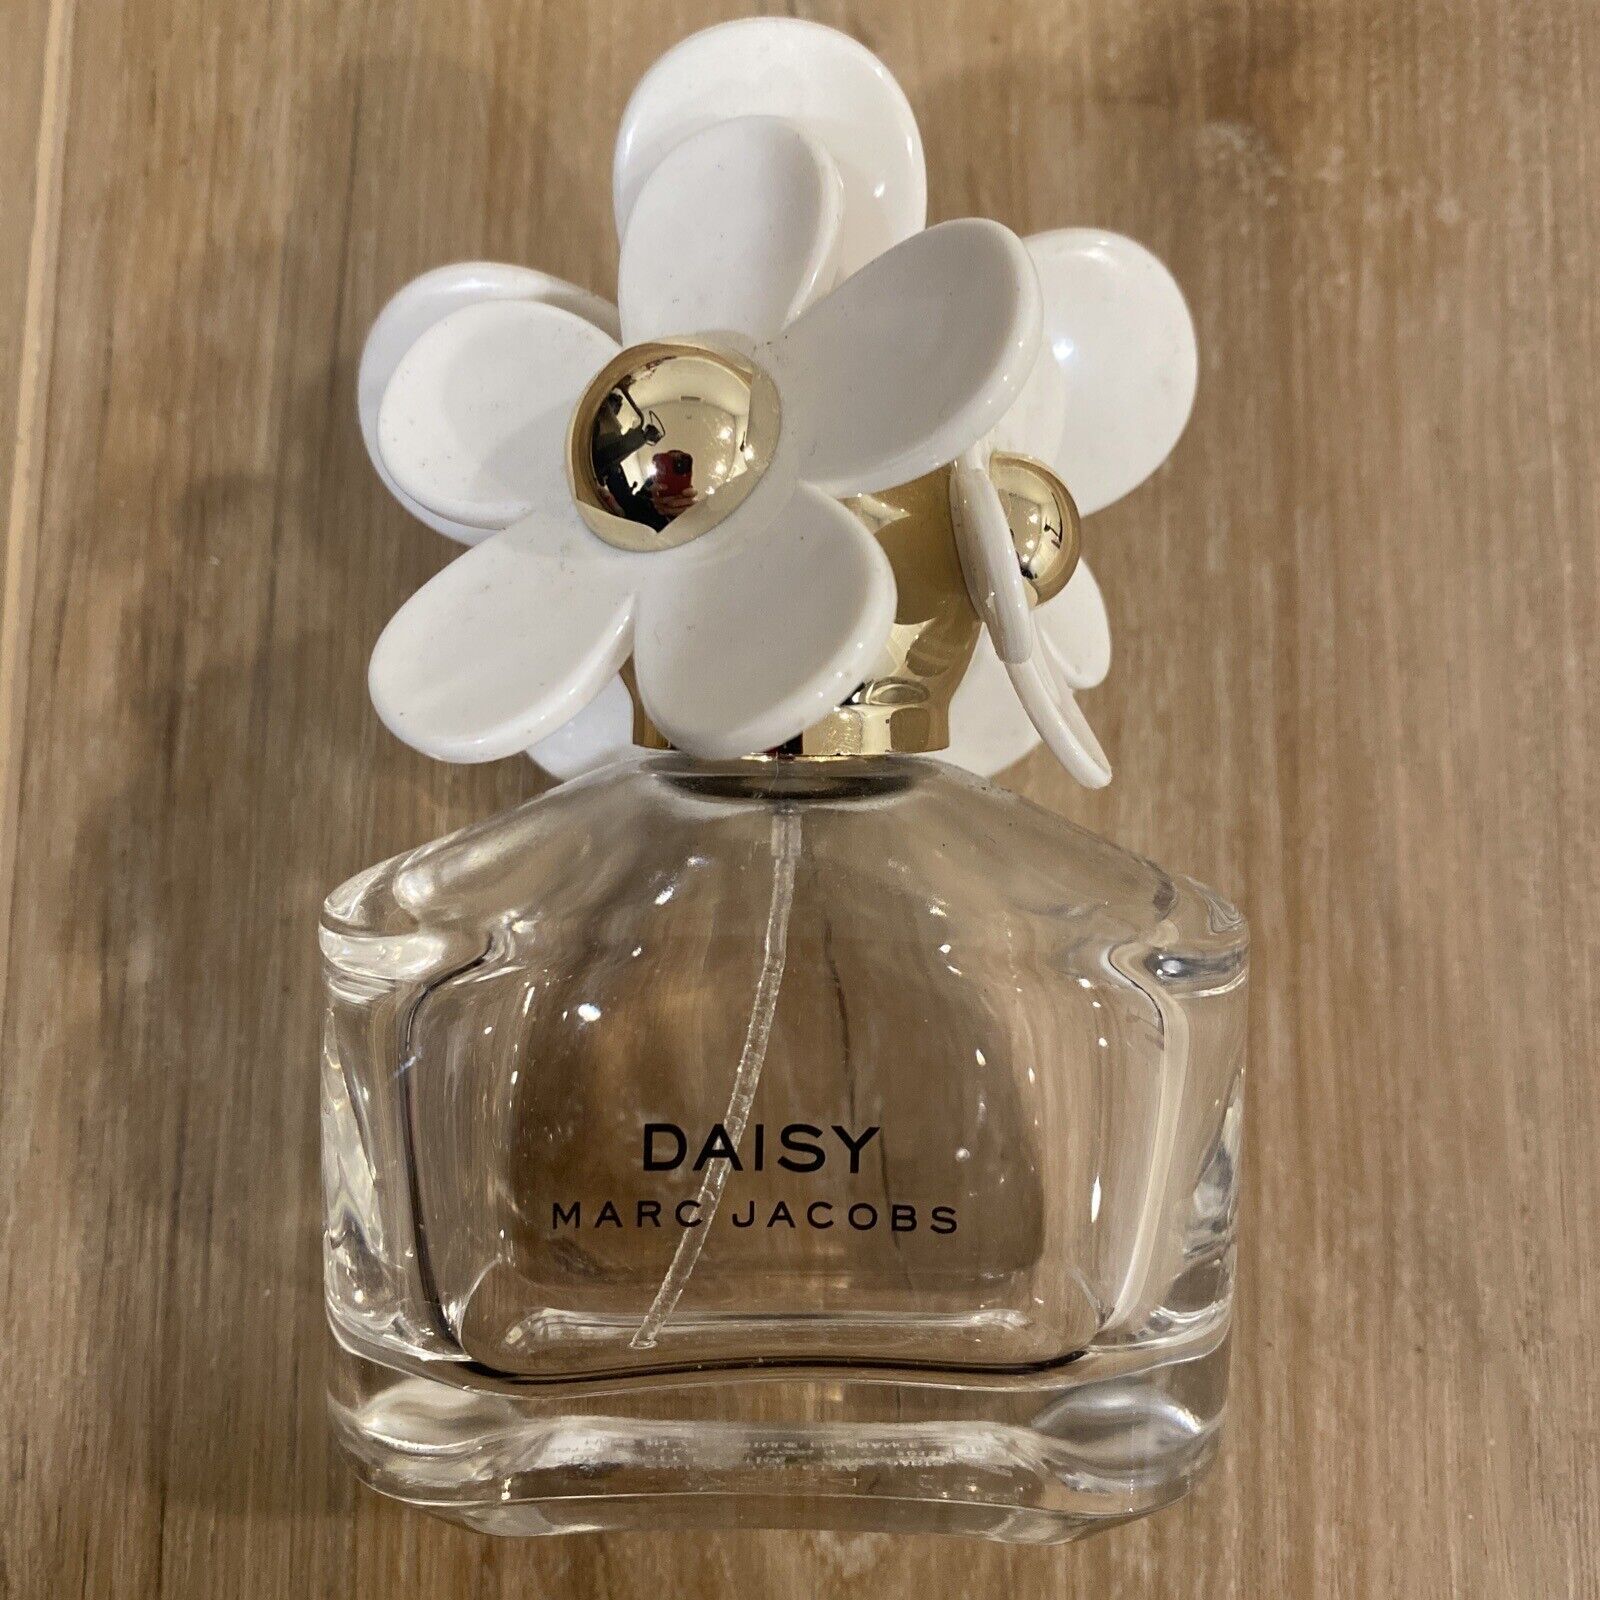 Daisy By Marc Jacobs Empty Perfume Bottle 1.7 fl oz Collectible